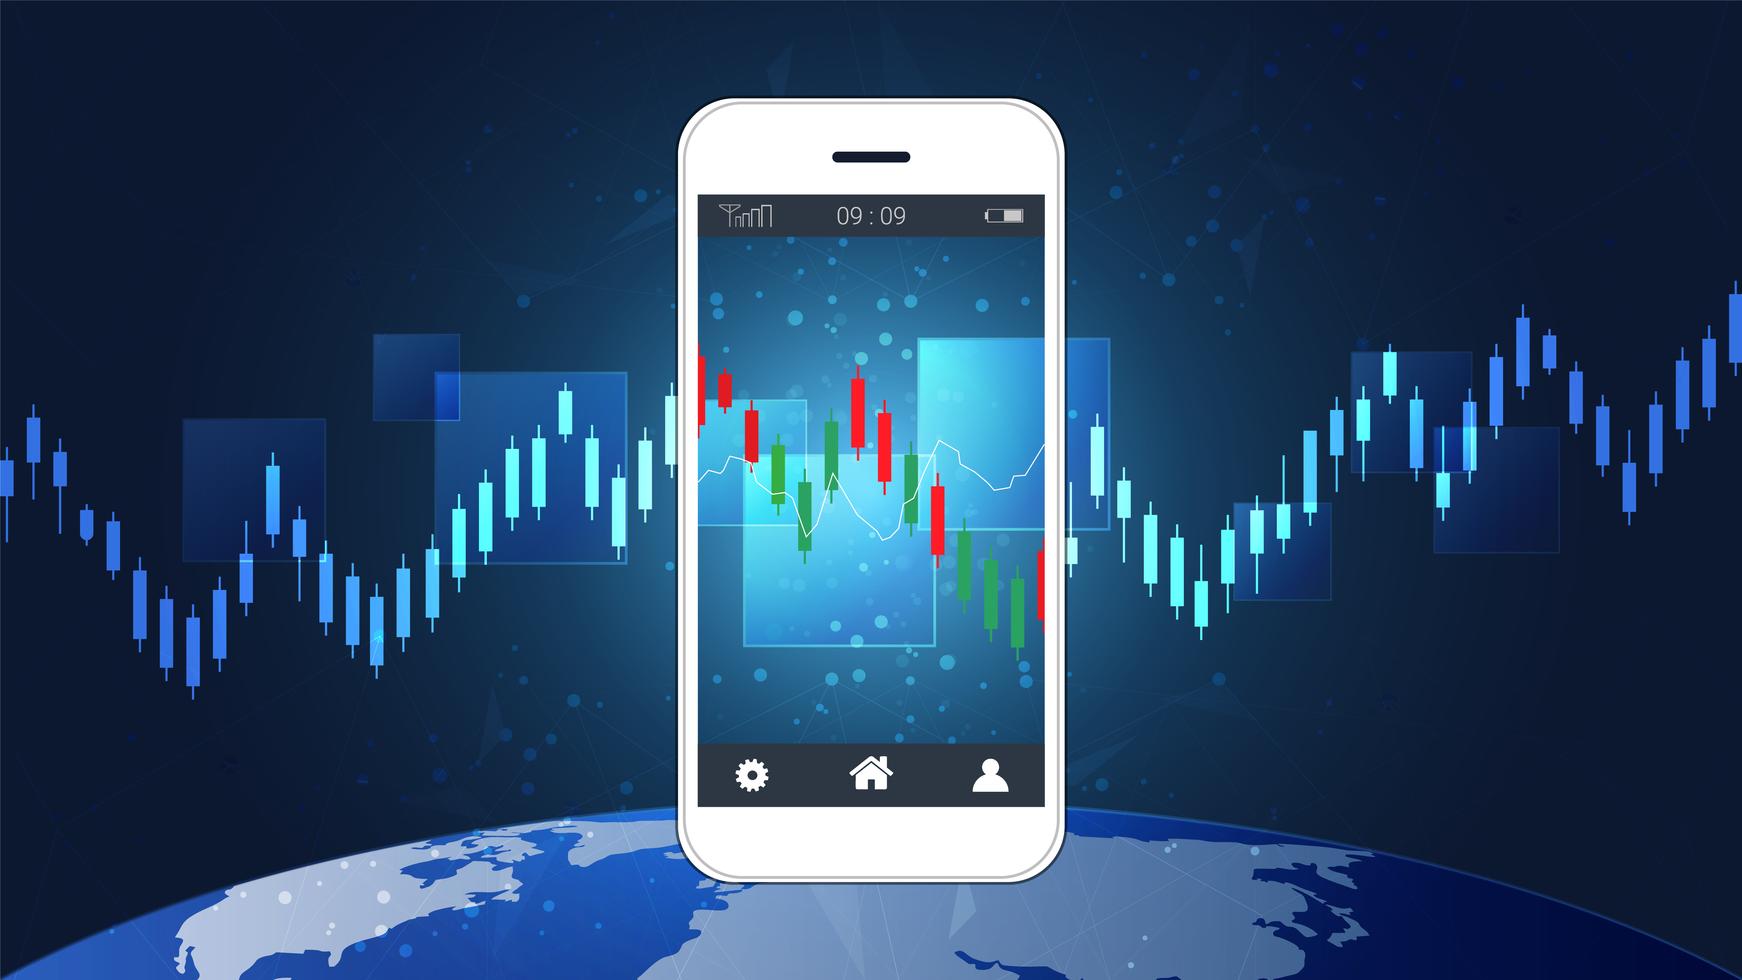 Forex phone charts forex andrews pitchfork technical indicator index